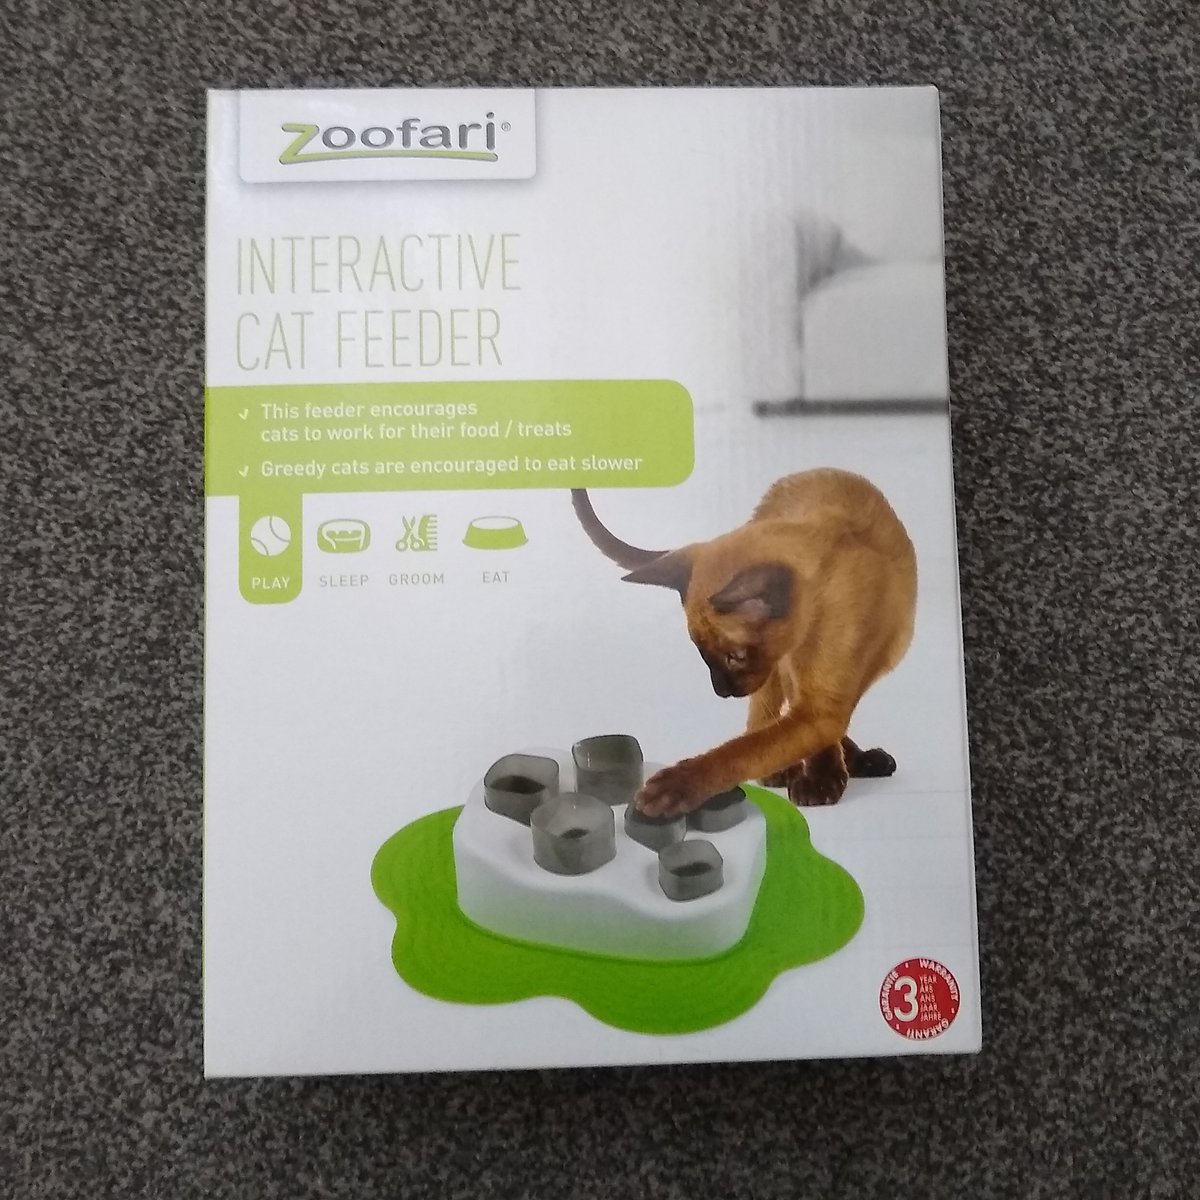 https://wirralwhiskers.co.uk/images/7DeGIs24gs3OWjraYzRHeKcW5MY=/127/min-1200x630/Interactive_cat_feeder.jpg